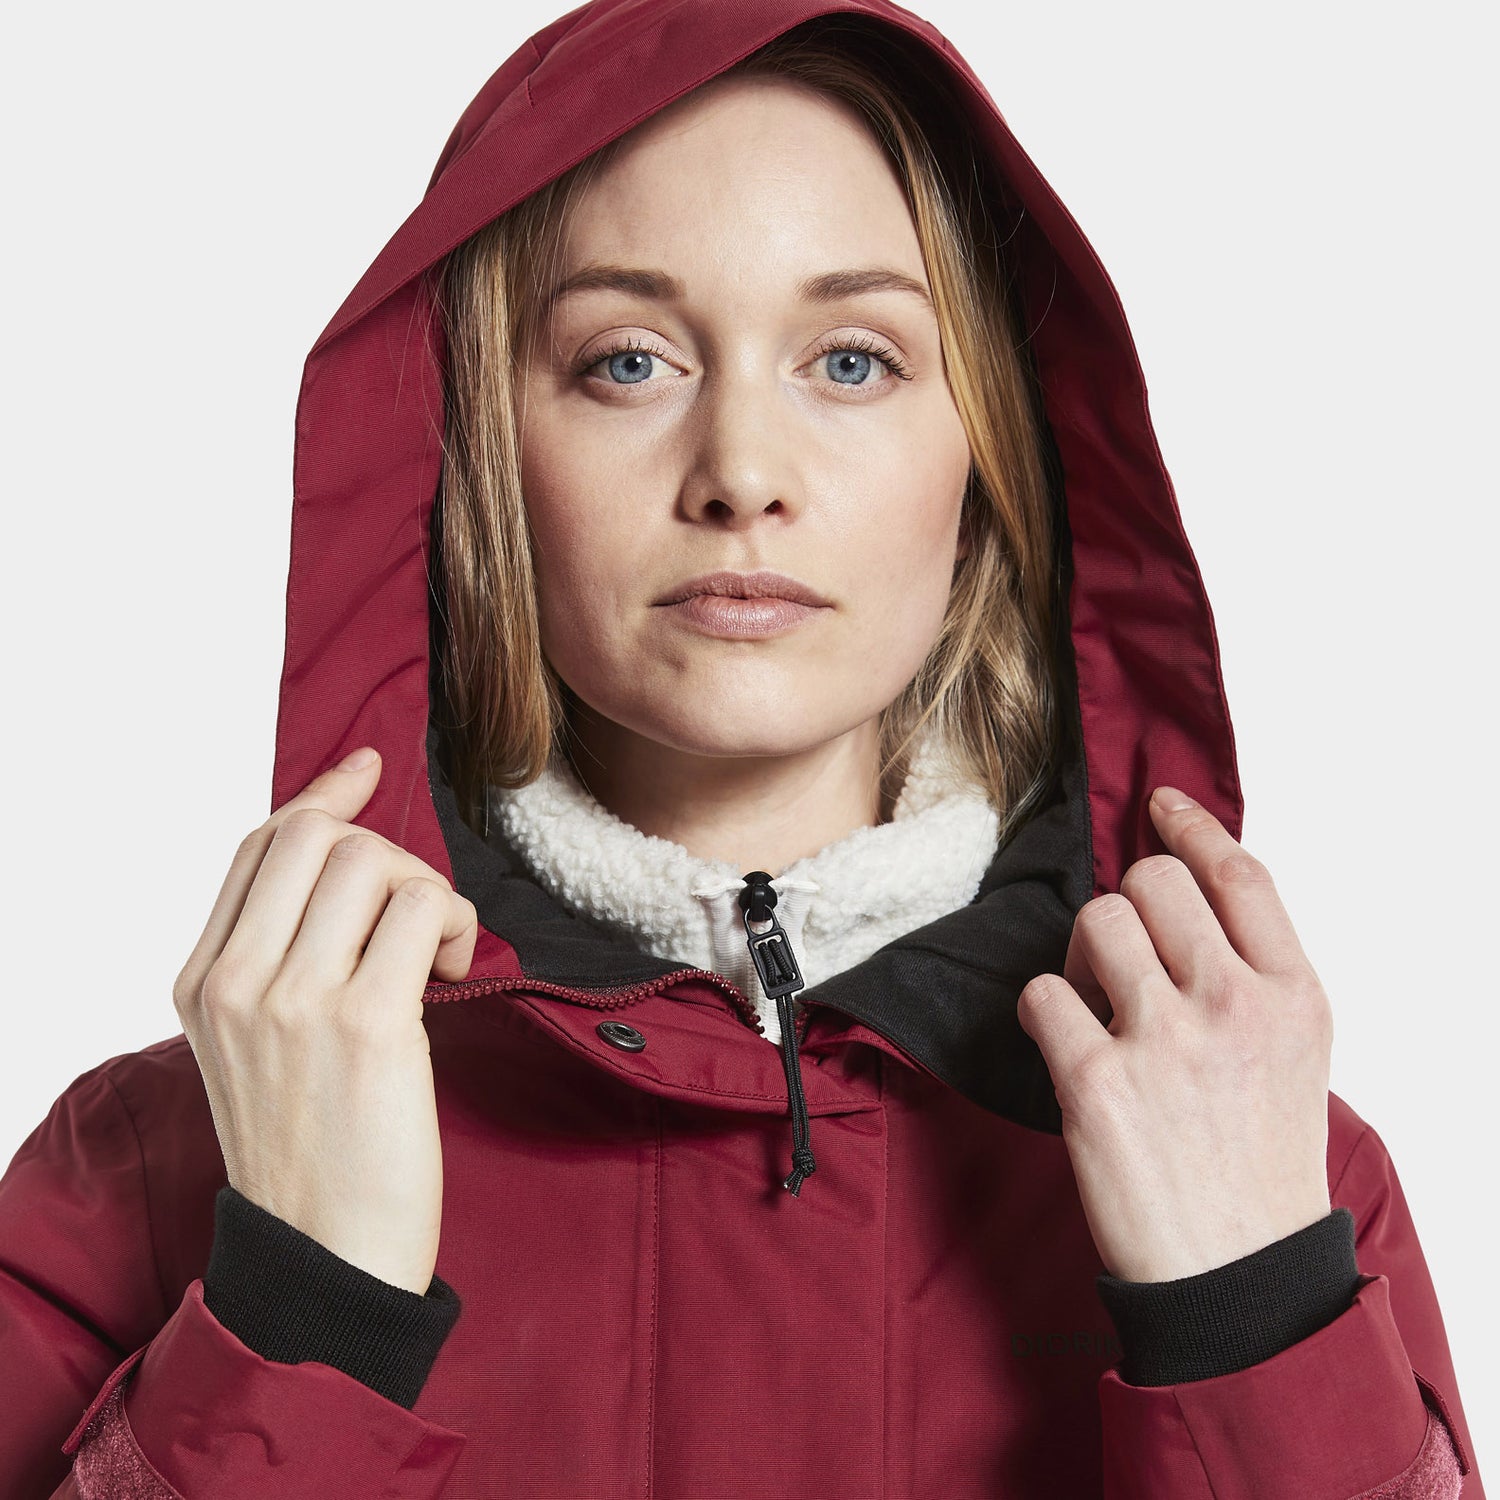 Didriksons Frida Womens Parka 6 | New Forest Clothing